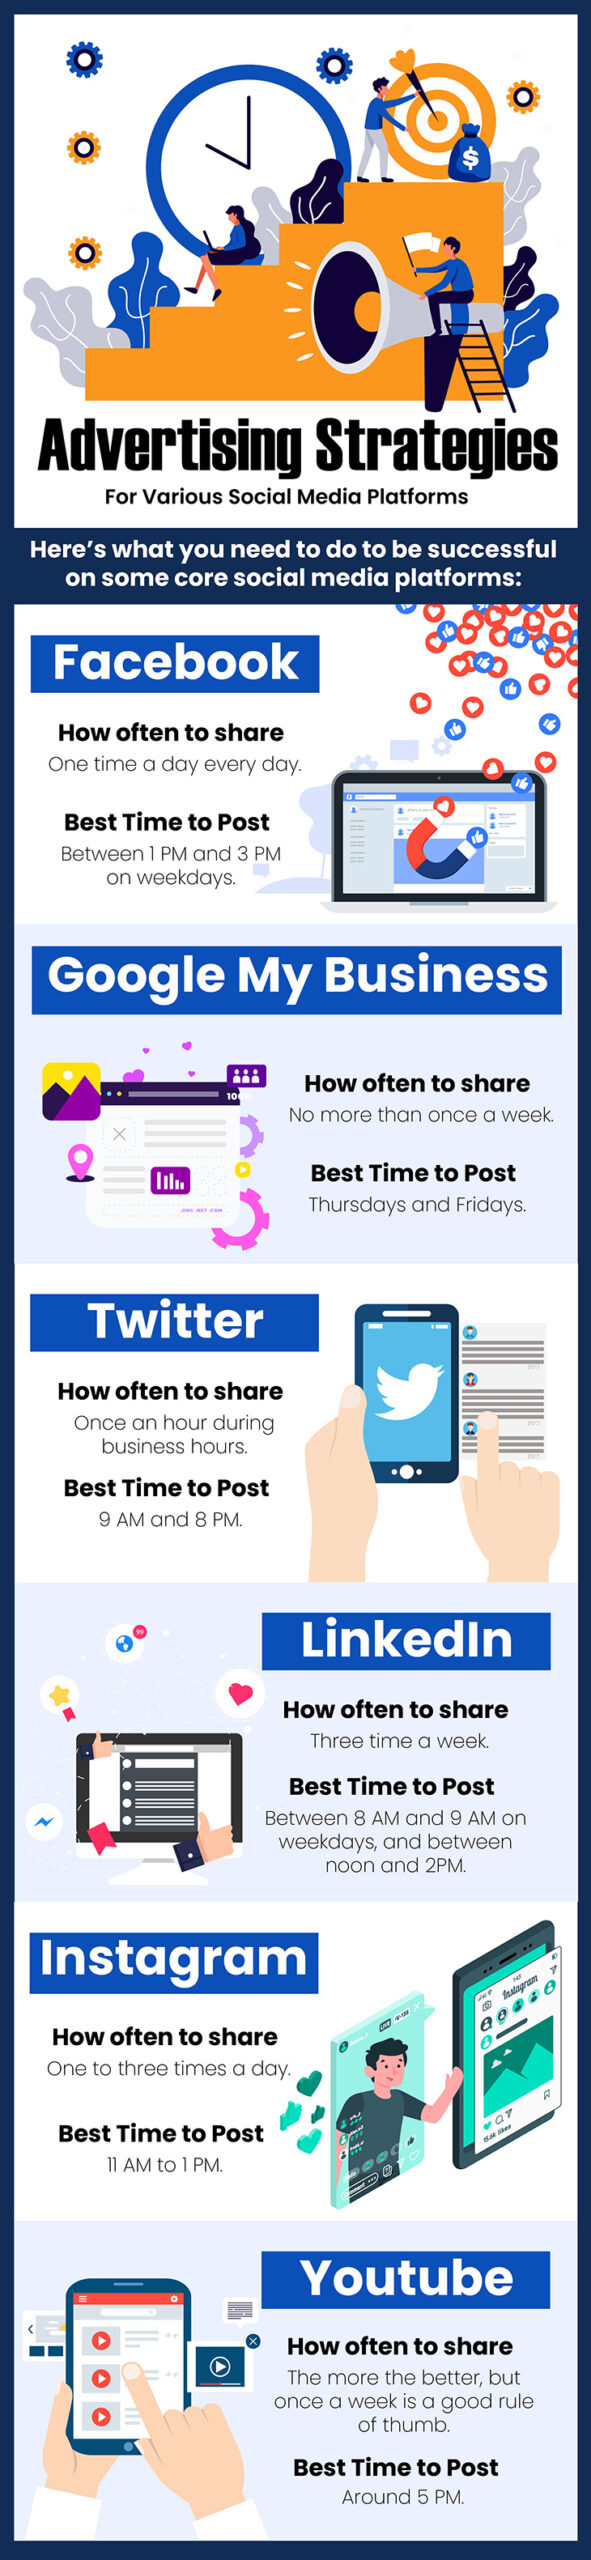 Infographic on how to advertise on different social media platforms